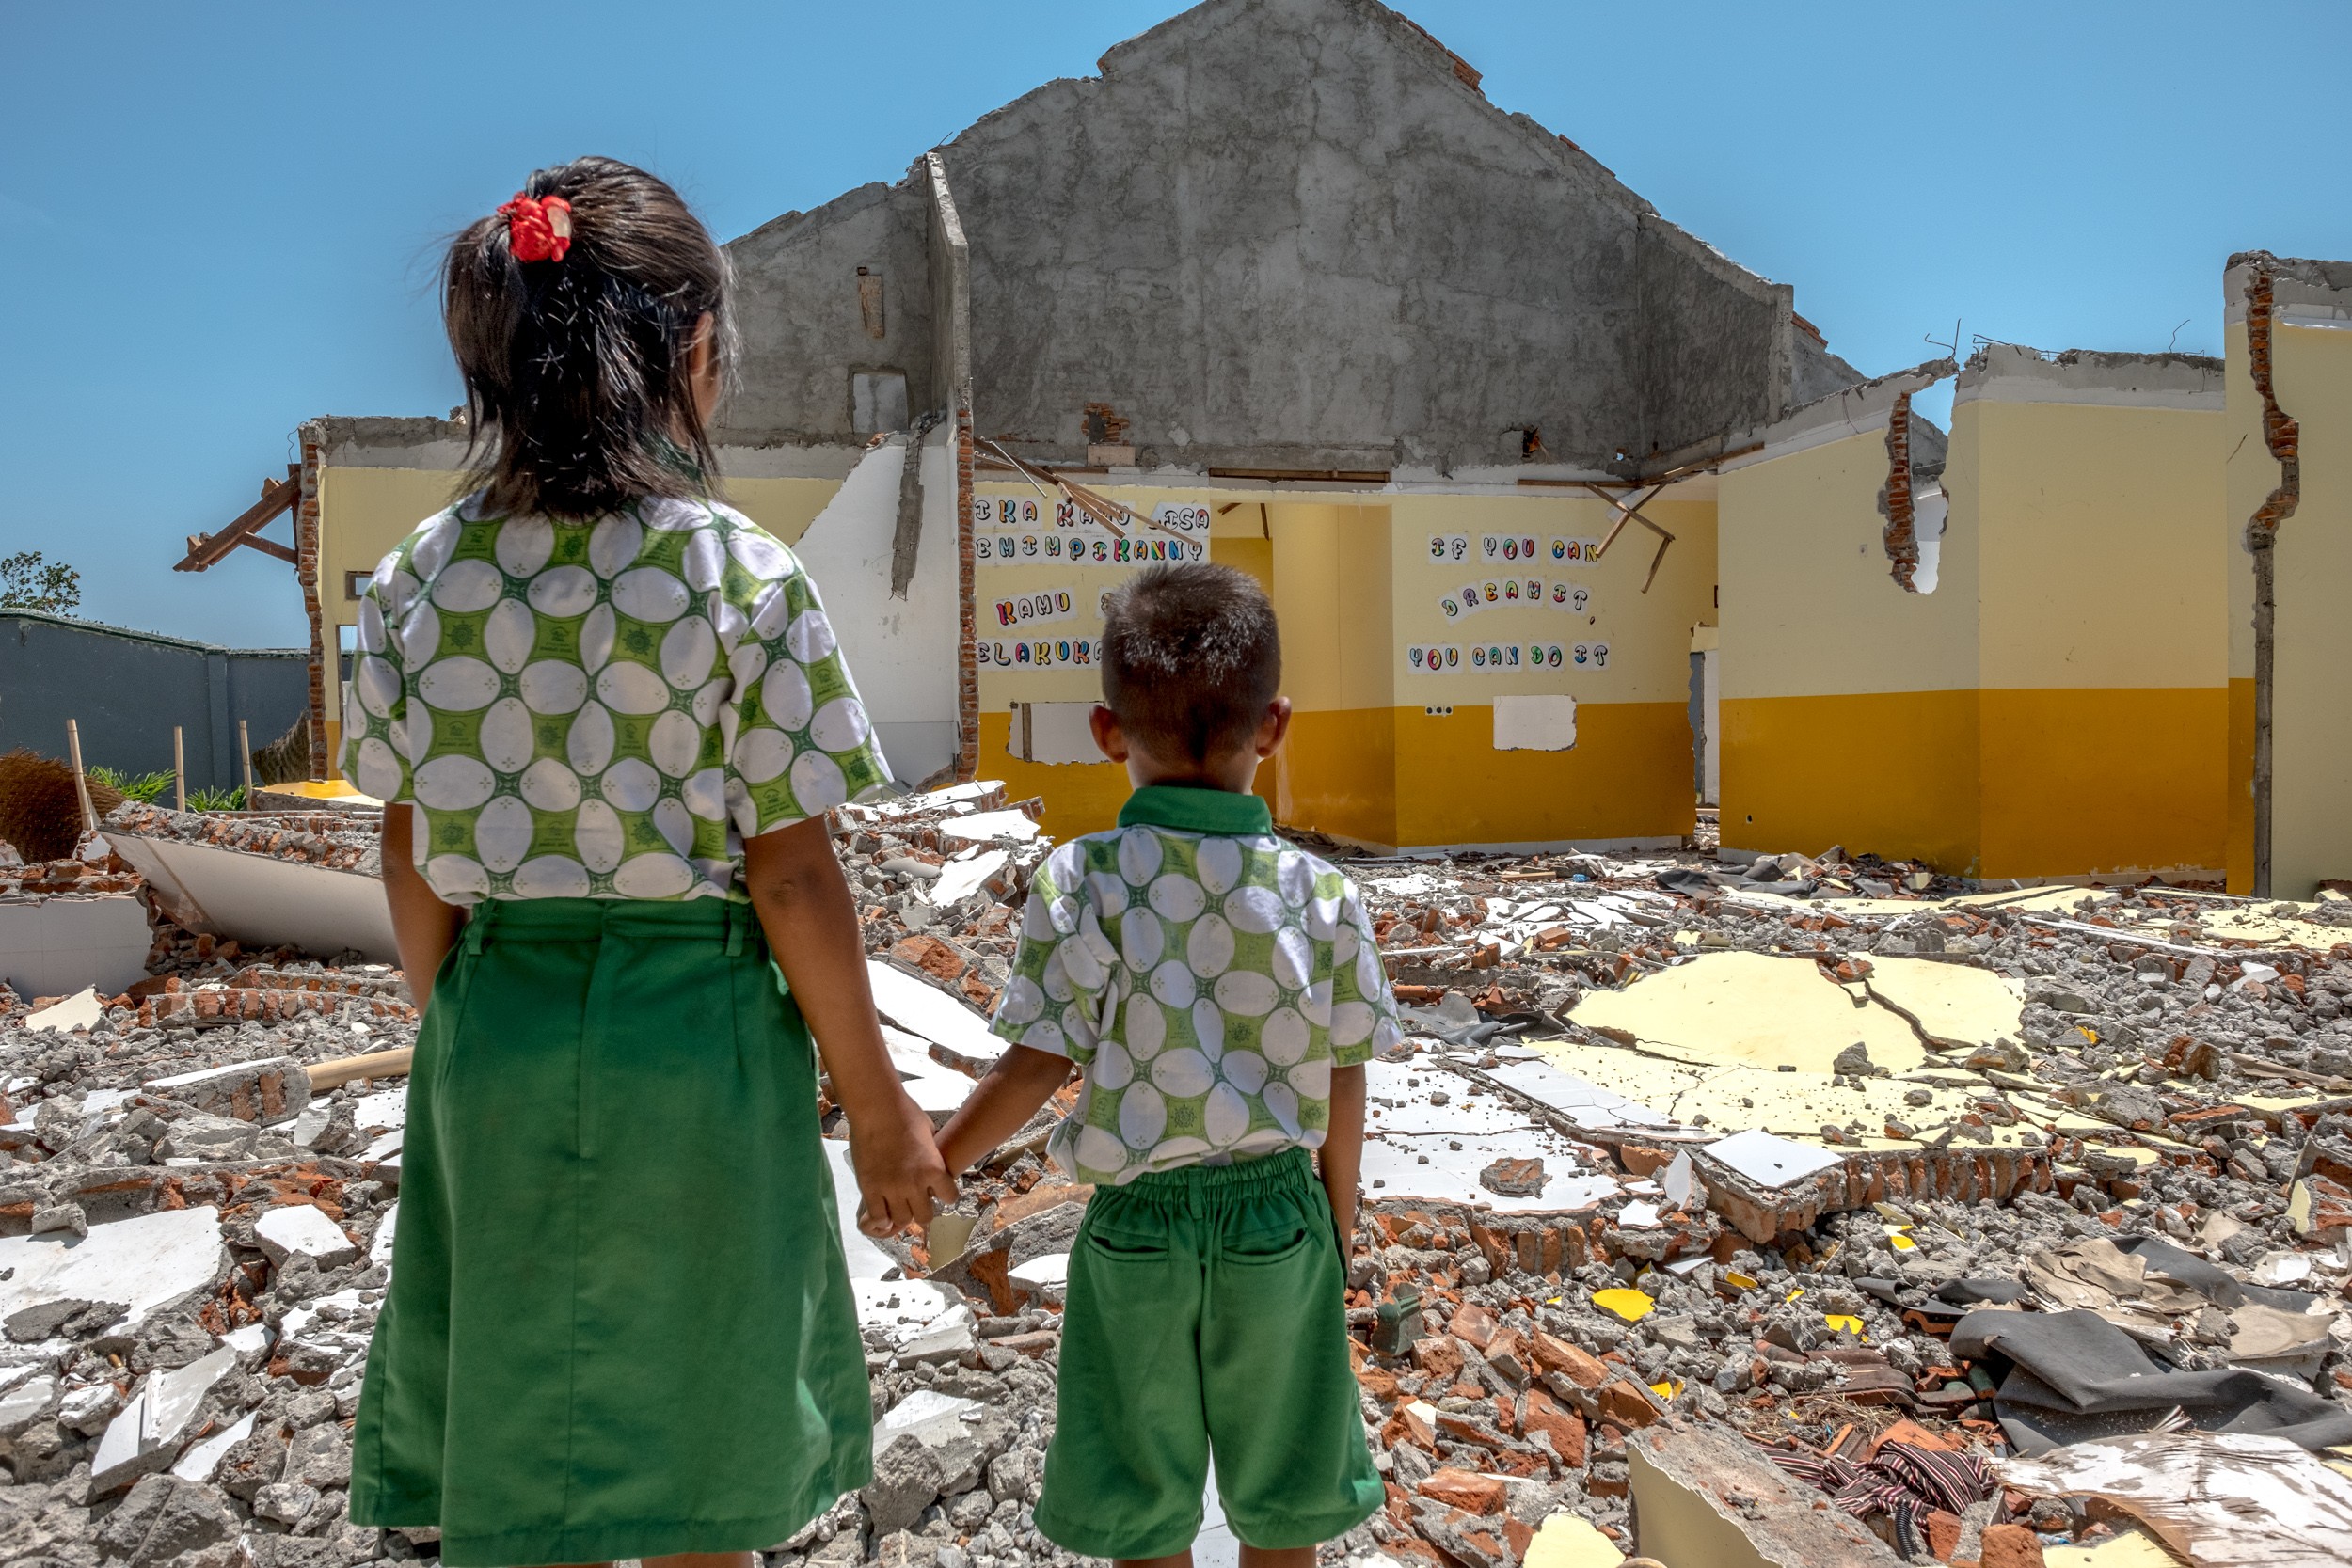 Children look at the damage after the Lombok earthquakes. Photo: courtesy of Chaim Fetter and Peduli Anak Foundation